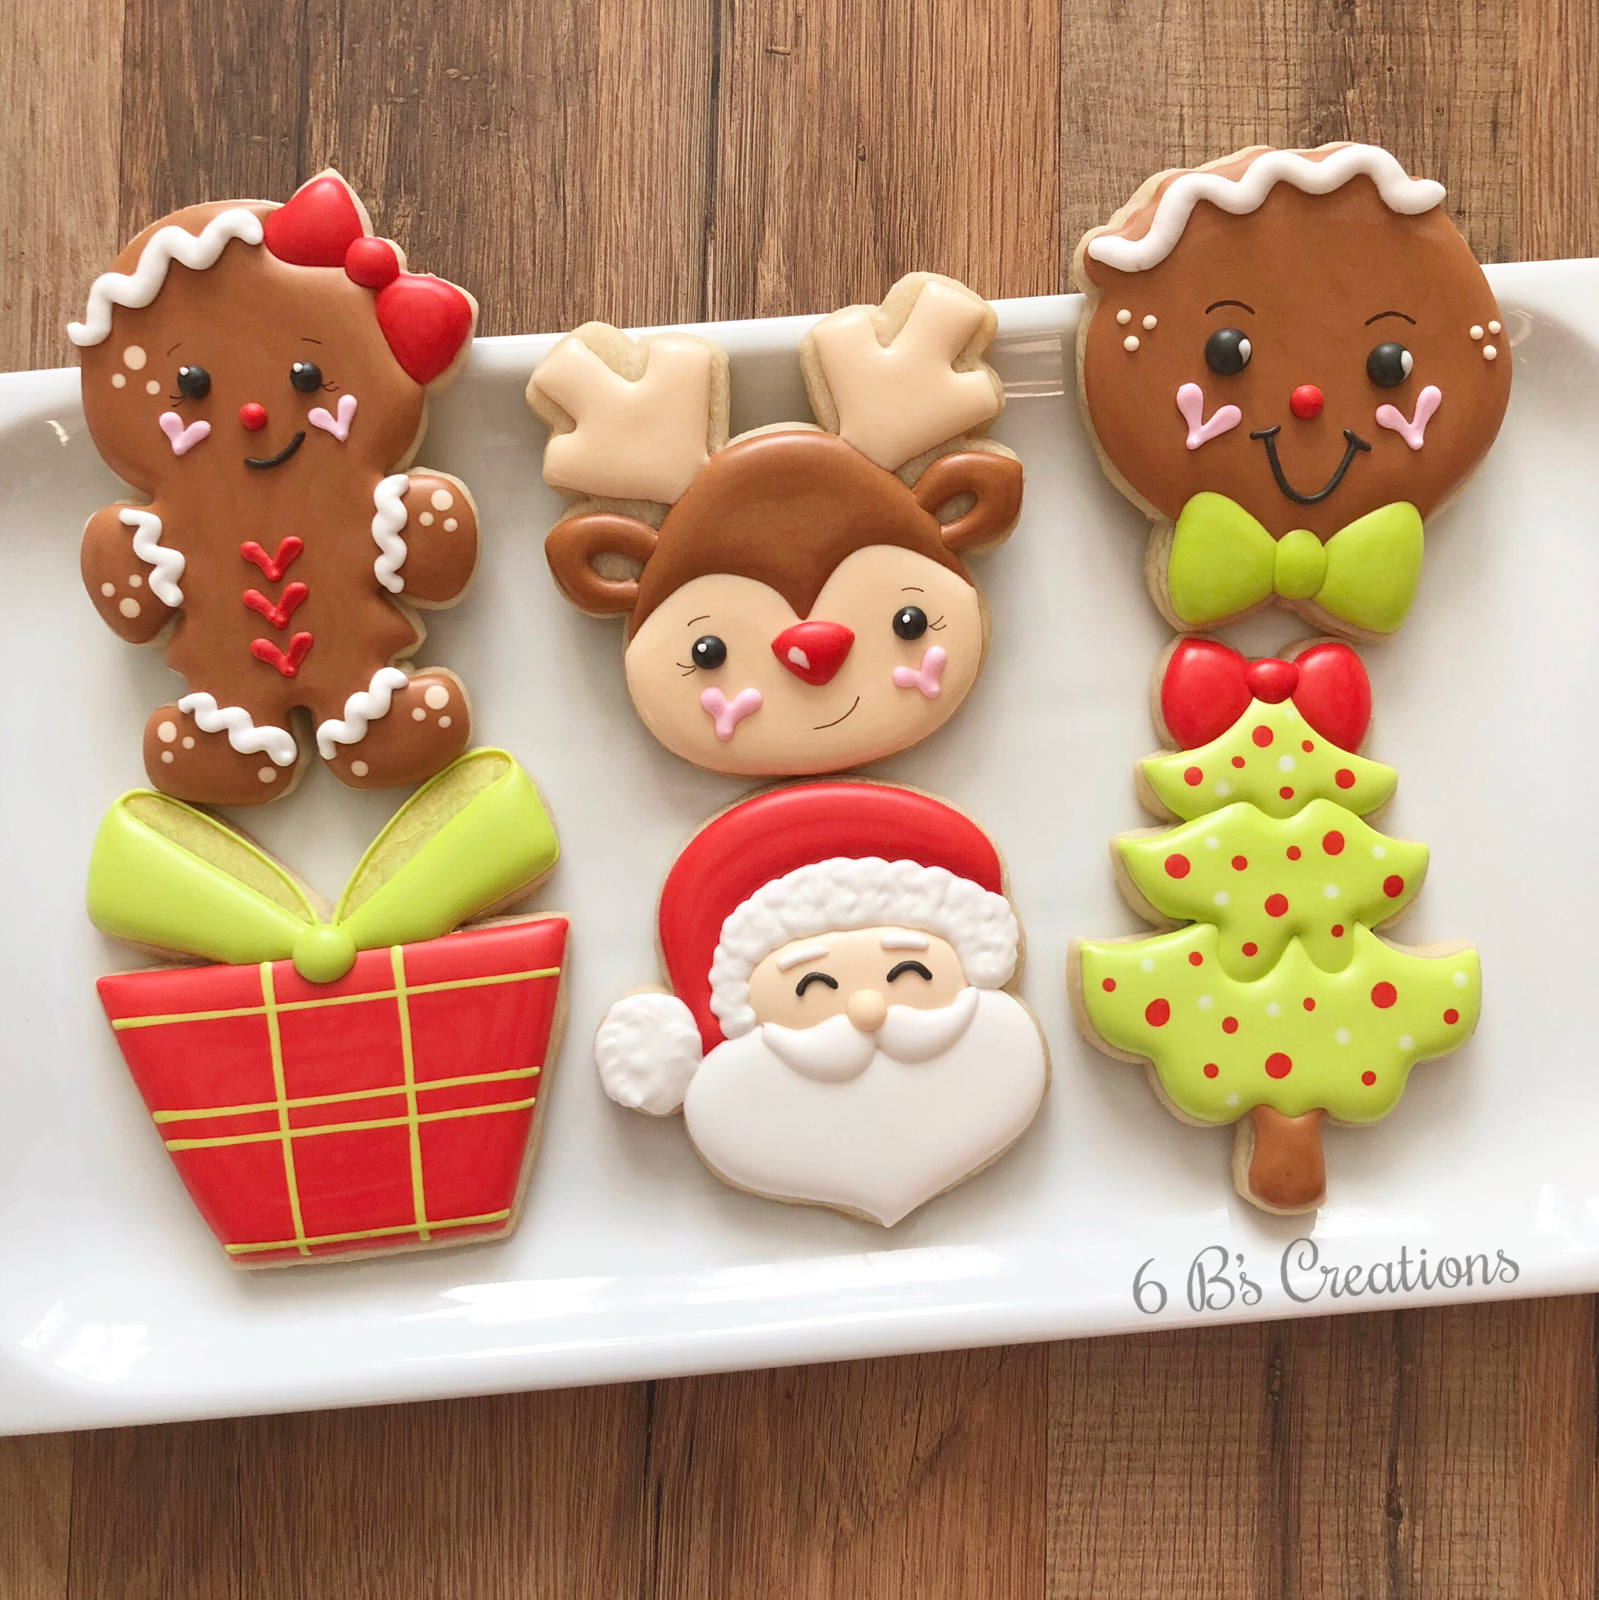 6 B's Creations Holiday Set of 5 Cookie Cutters